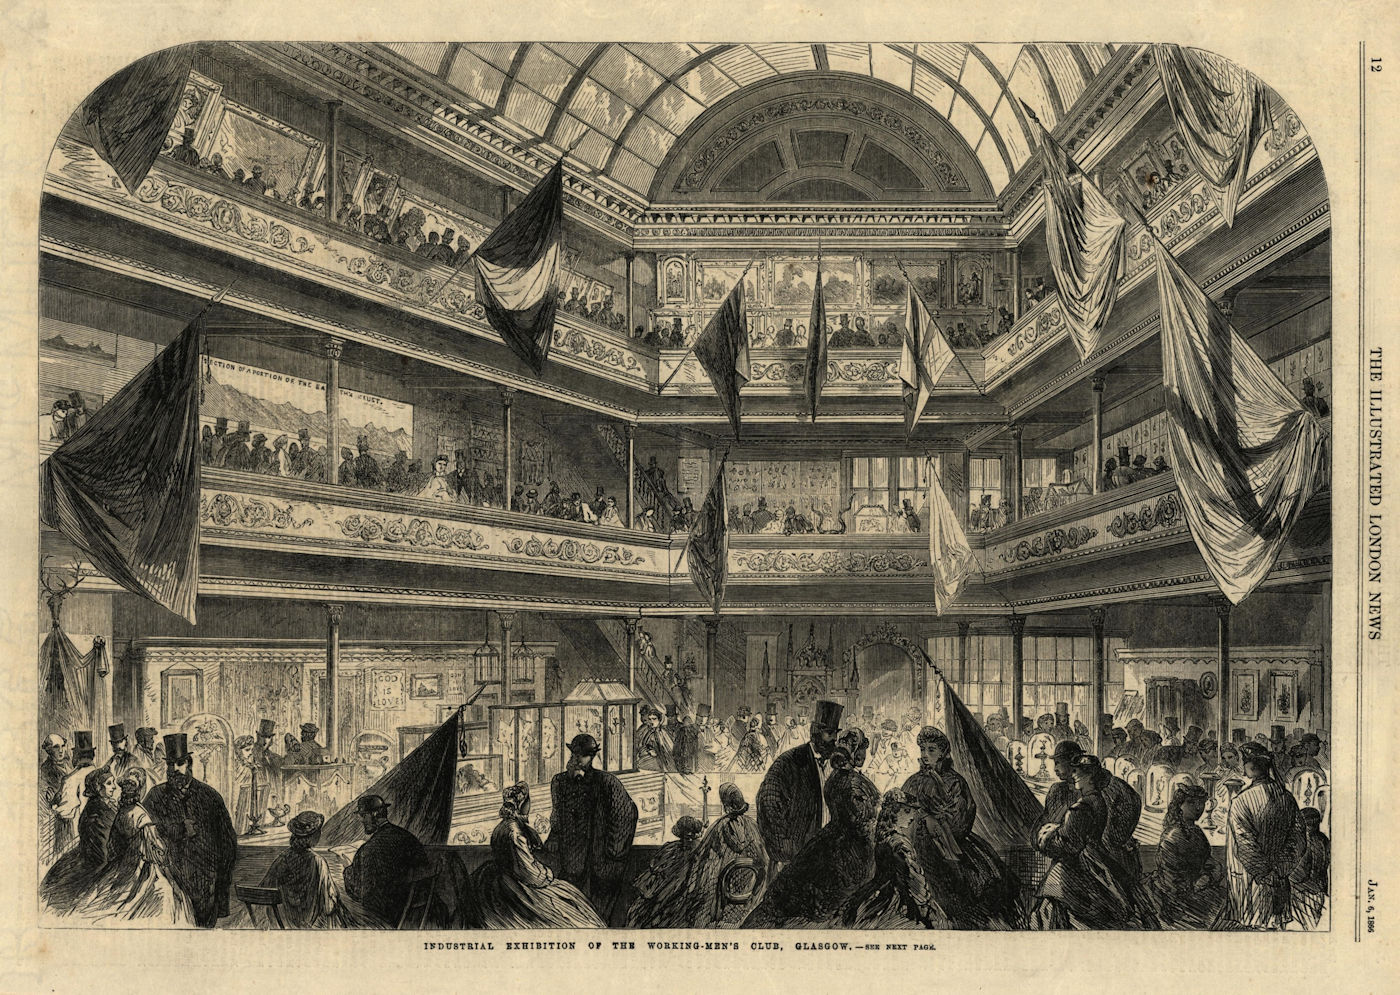 Associate Product Industrial Exhibition of The Working-Men's Club, Glasgow. Scotland 1866 print